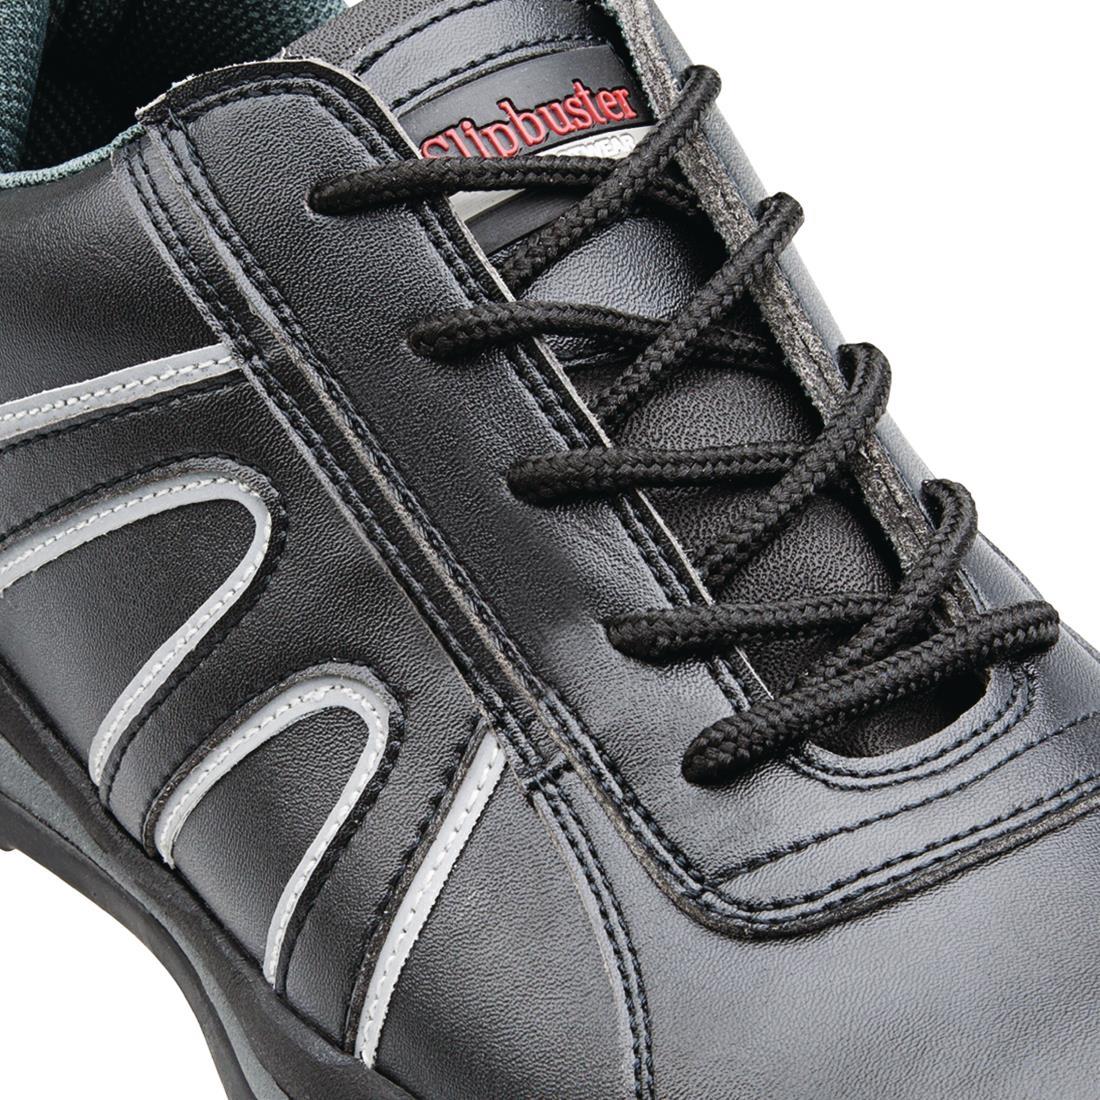 Slipbuster Safety Trainers Black 43 - A708-43  - 3